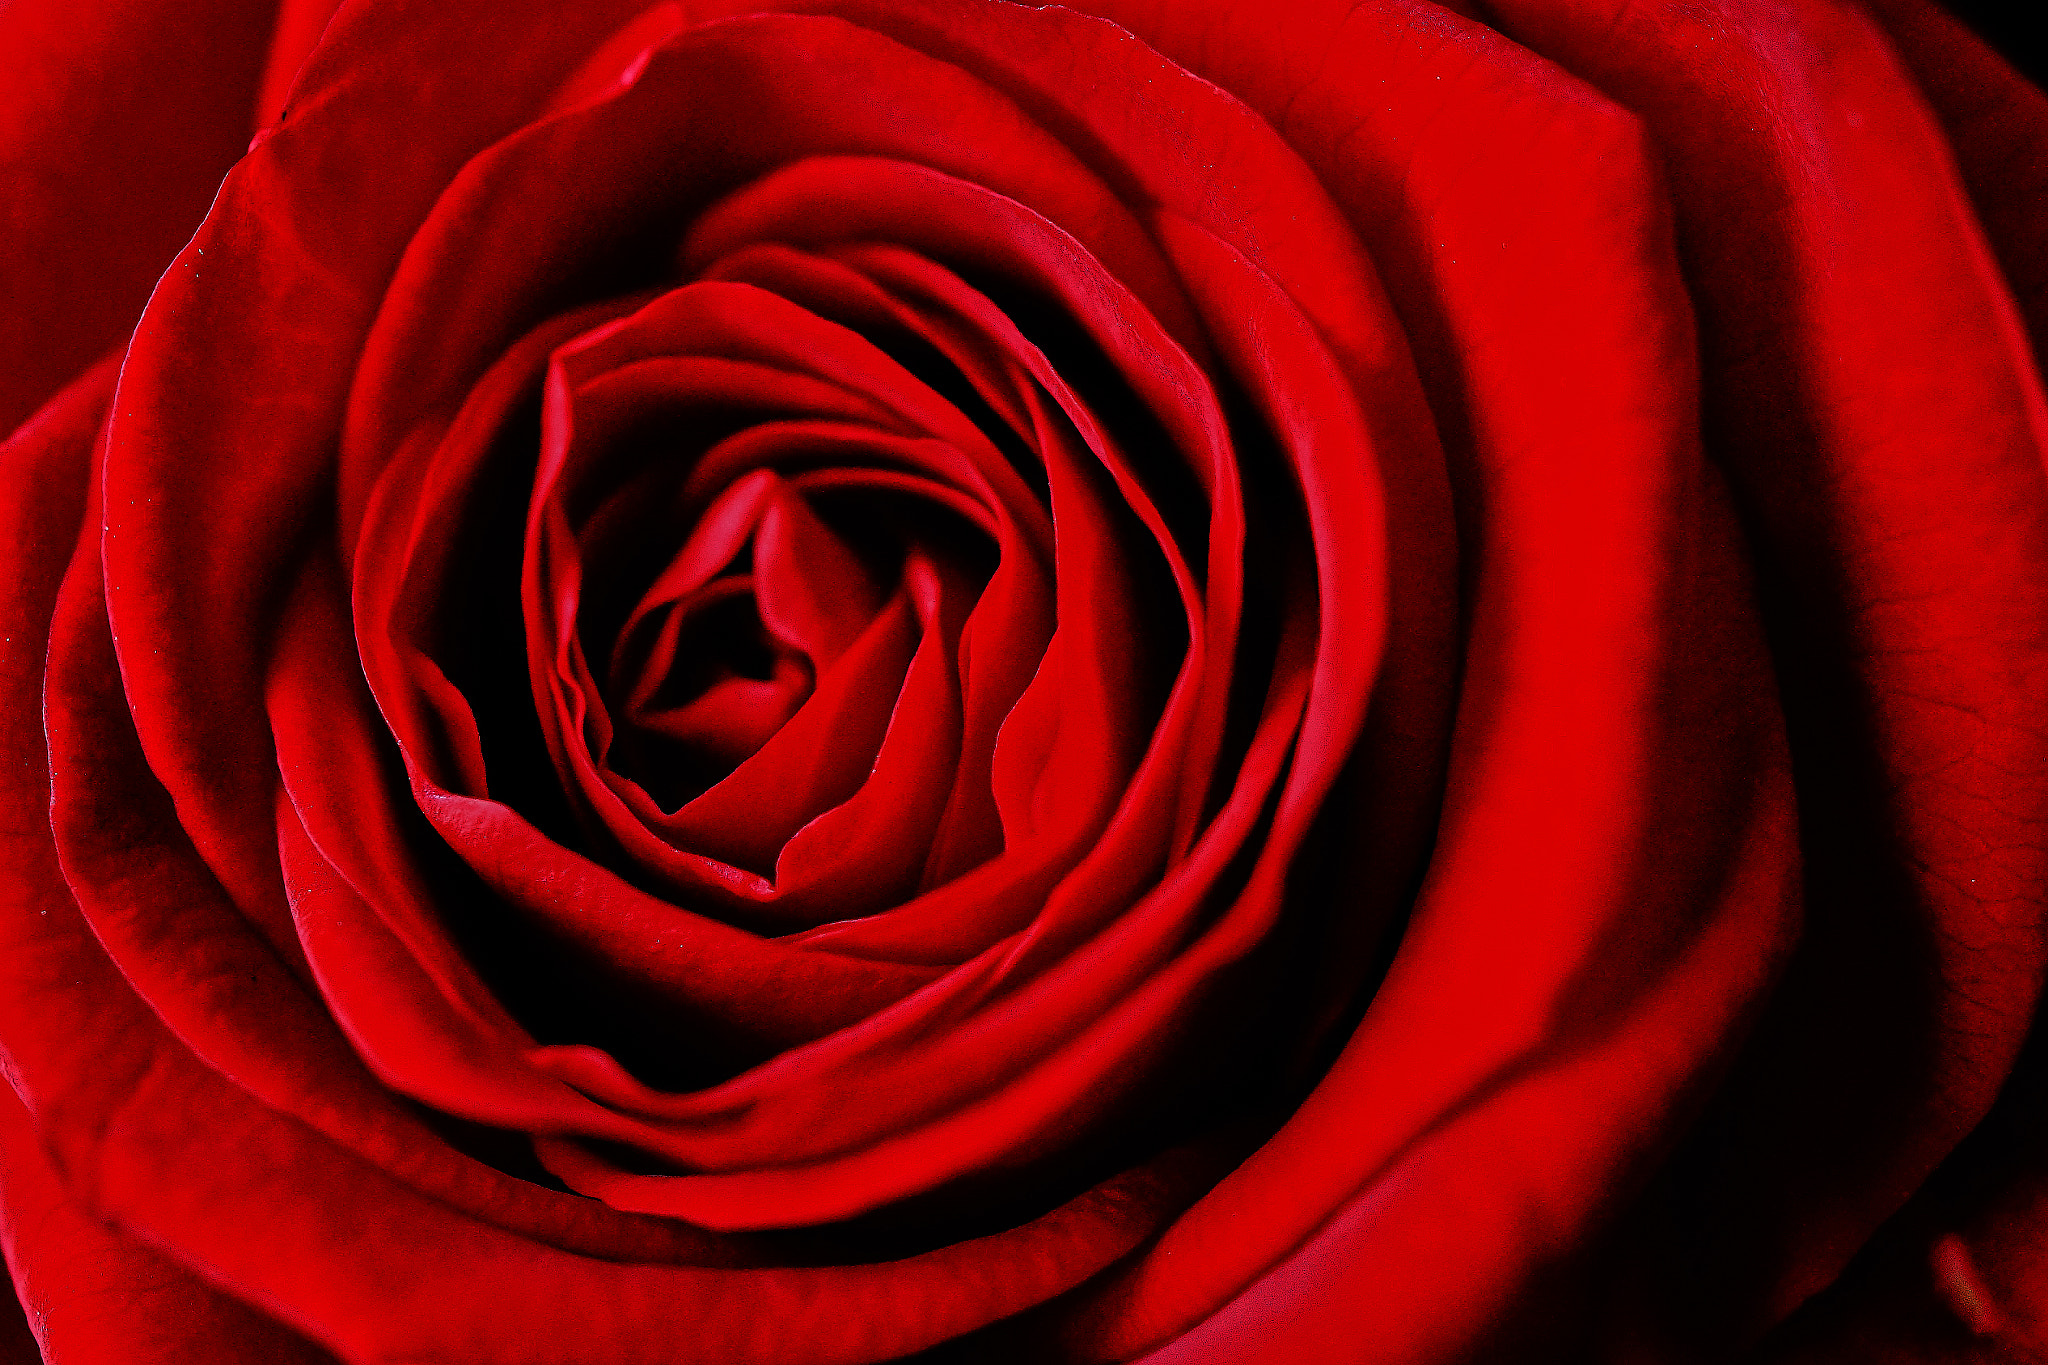 90mm F2.8 Macro SSM sample photo. The red rose whispers ... photography